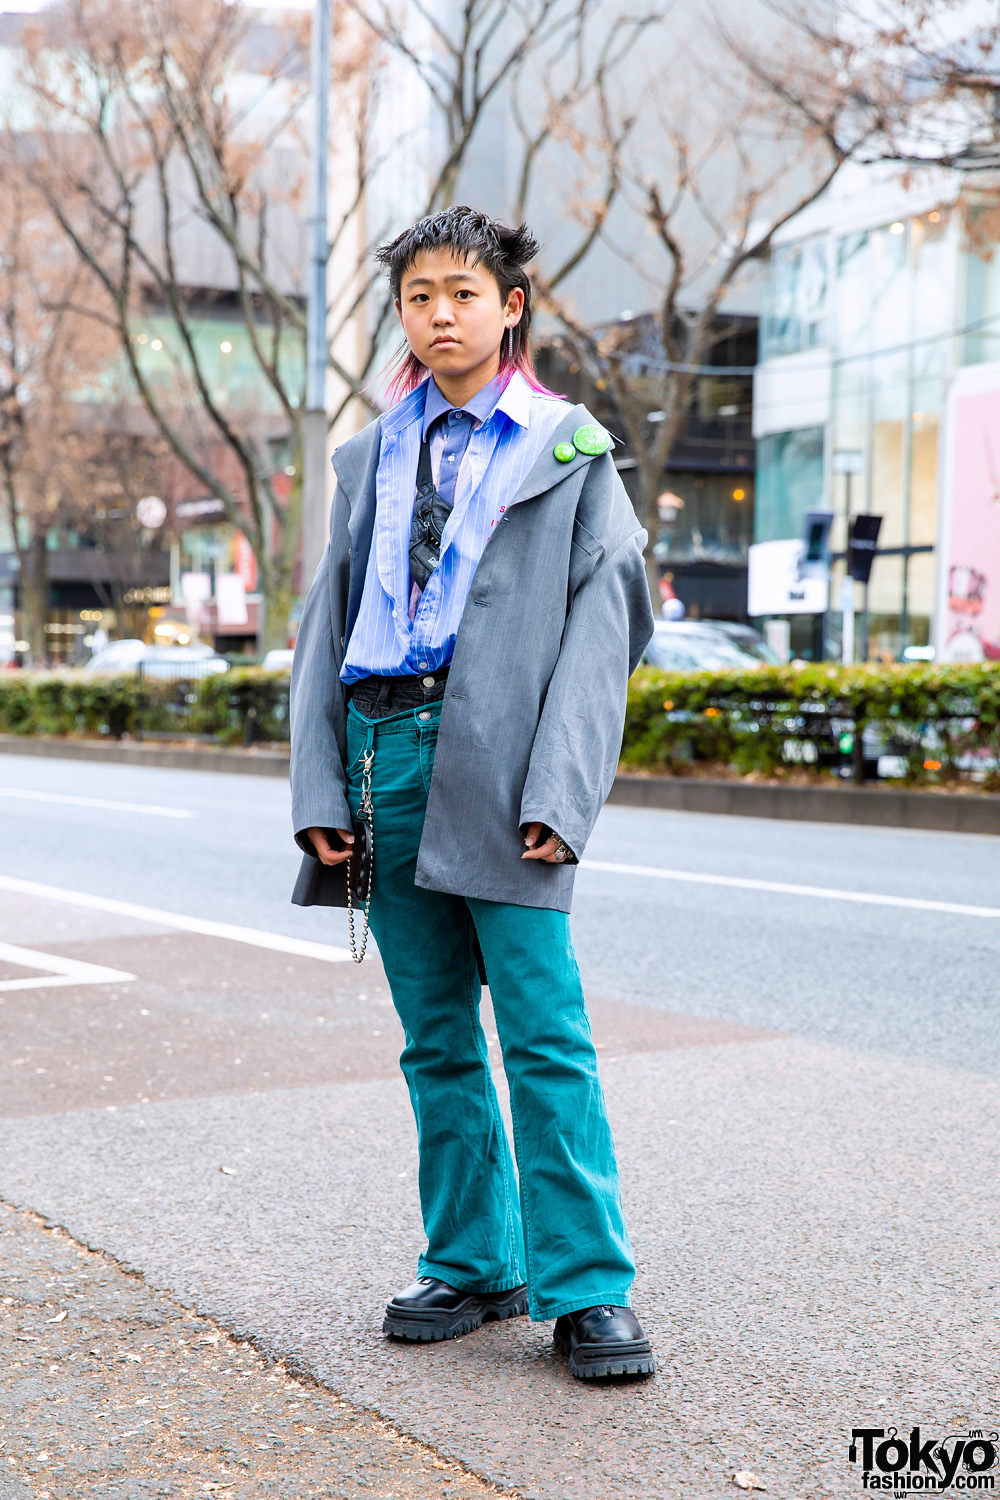 Harajuku Street Style w/ Pink-Tipped Hair, Layered Remake Shirts, Layered Denim Pants, Studded Waist Bag, Eytys, Never Mind the XU & BlackMeans Knuckle Duster